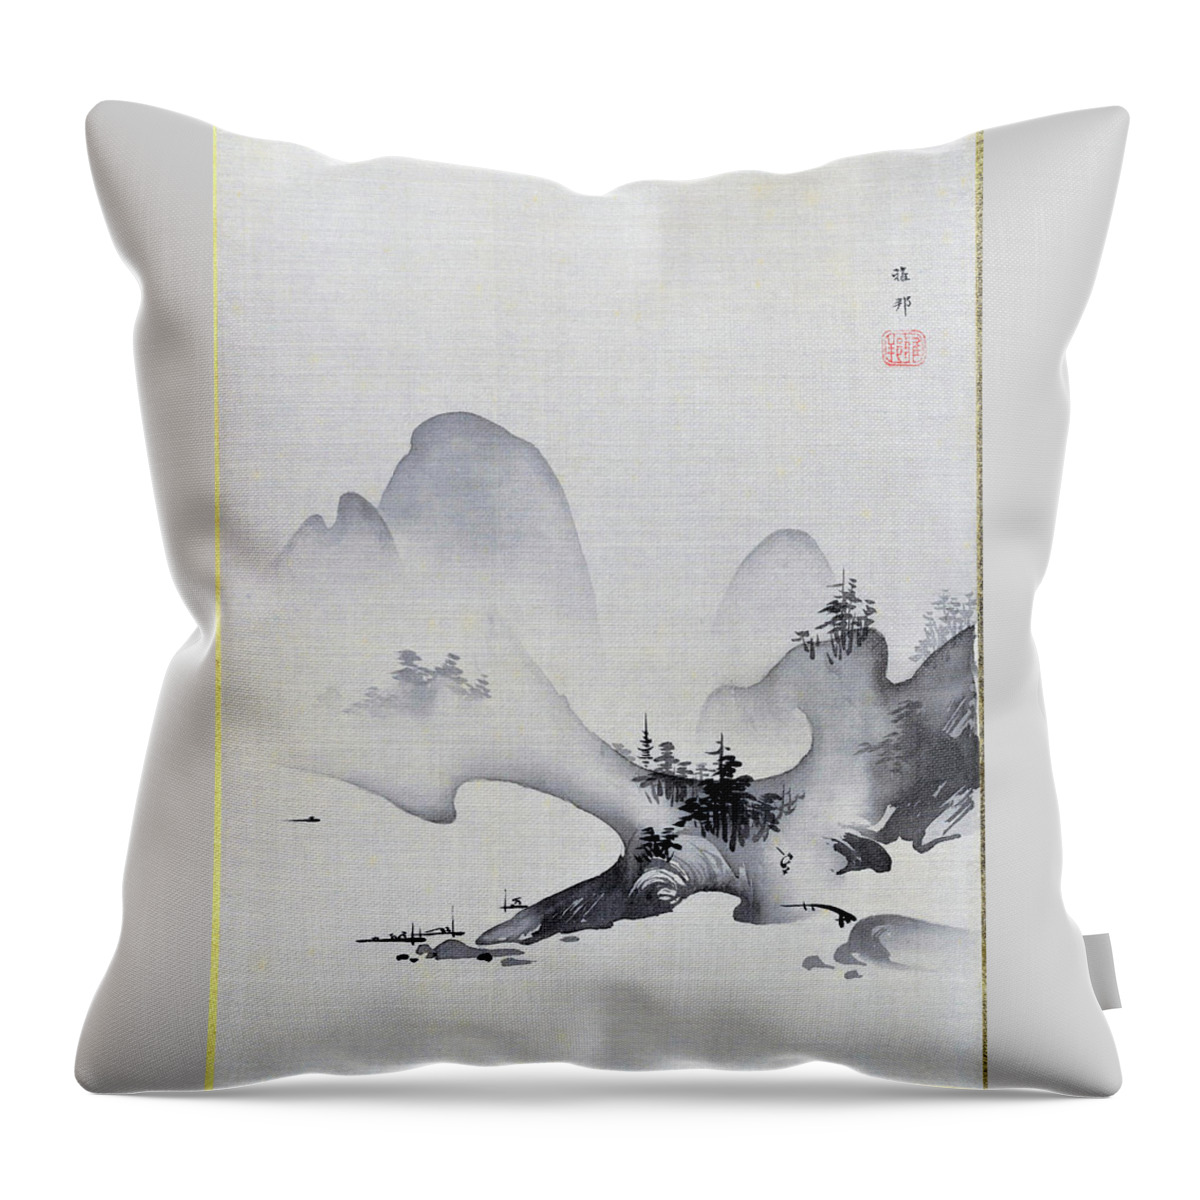 Hashimoto Gaho Throw Pillow featuring the painting Lake and Mountains - Digital Remastered Edition by Hashimoto Gaho